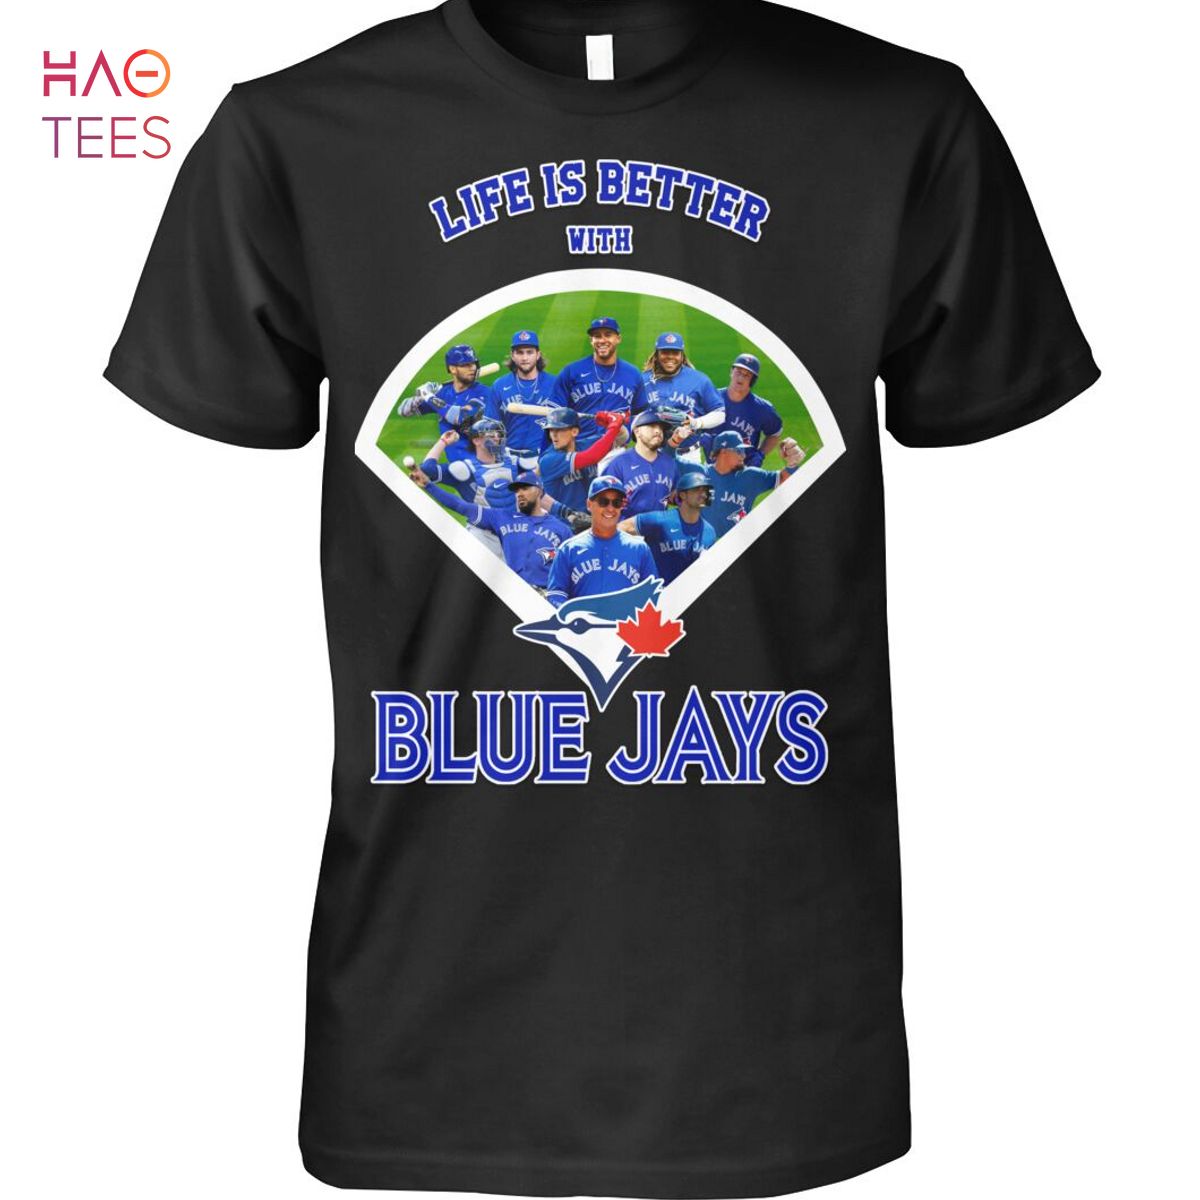 Life is Better With Blue Jays Shirt